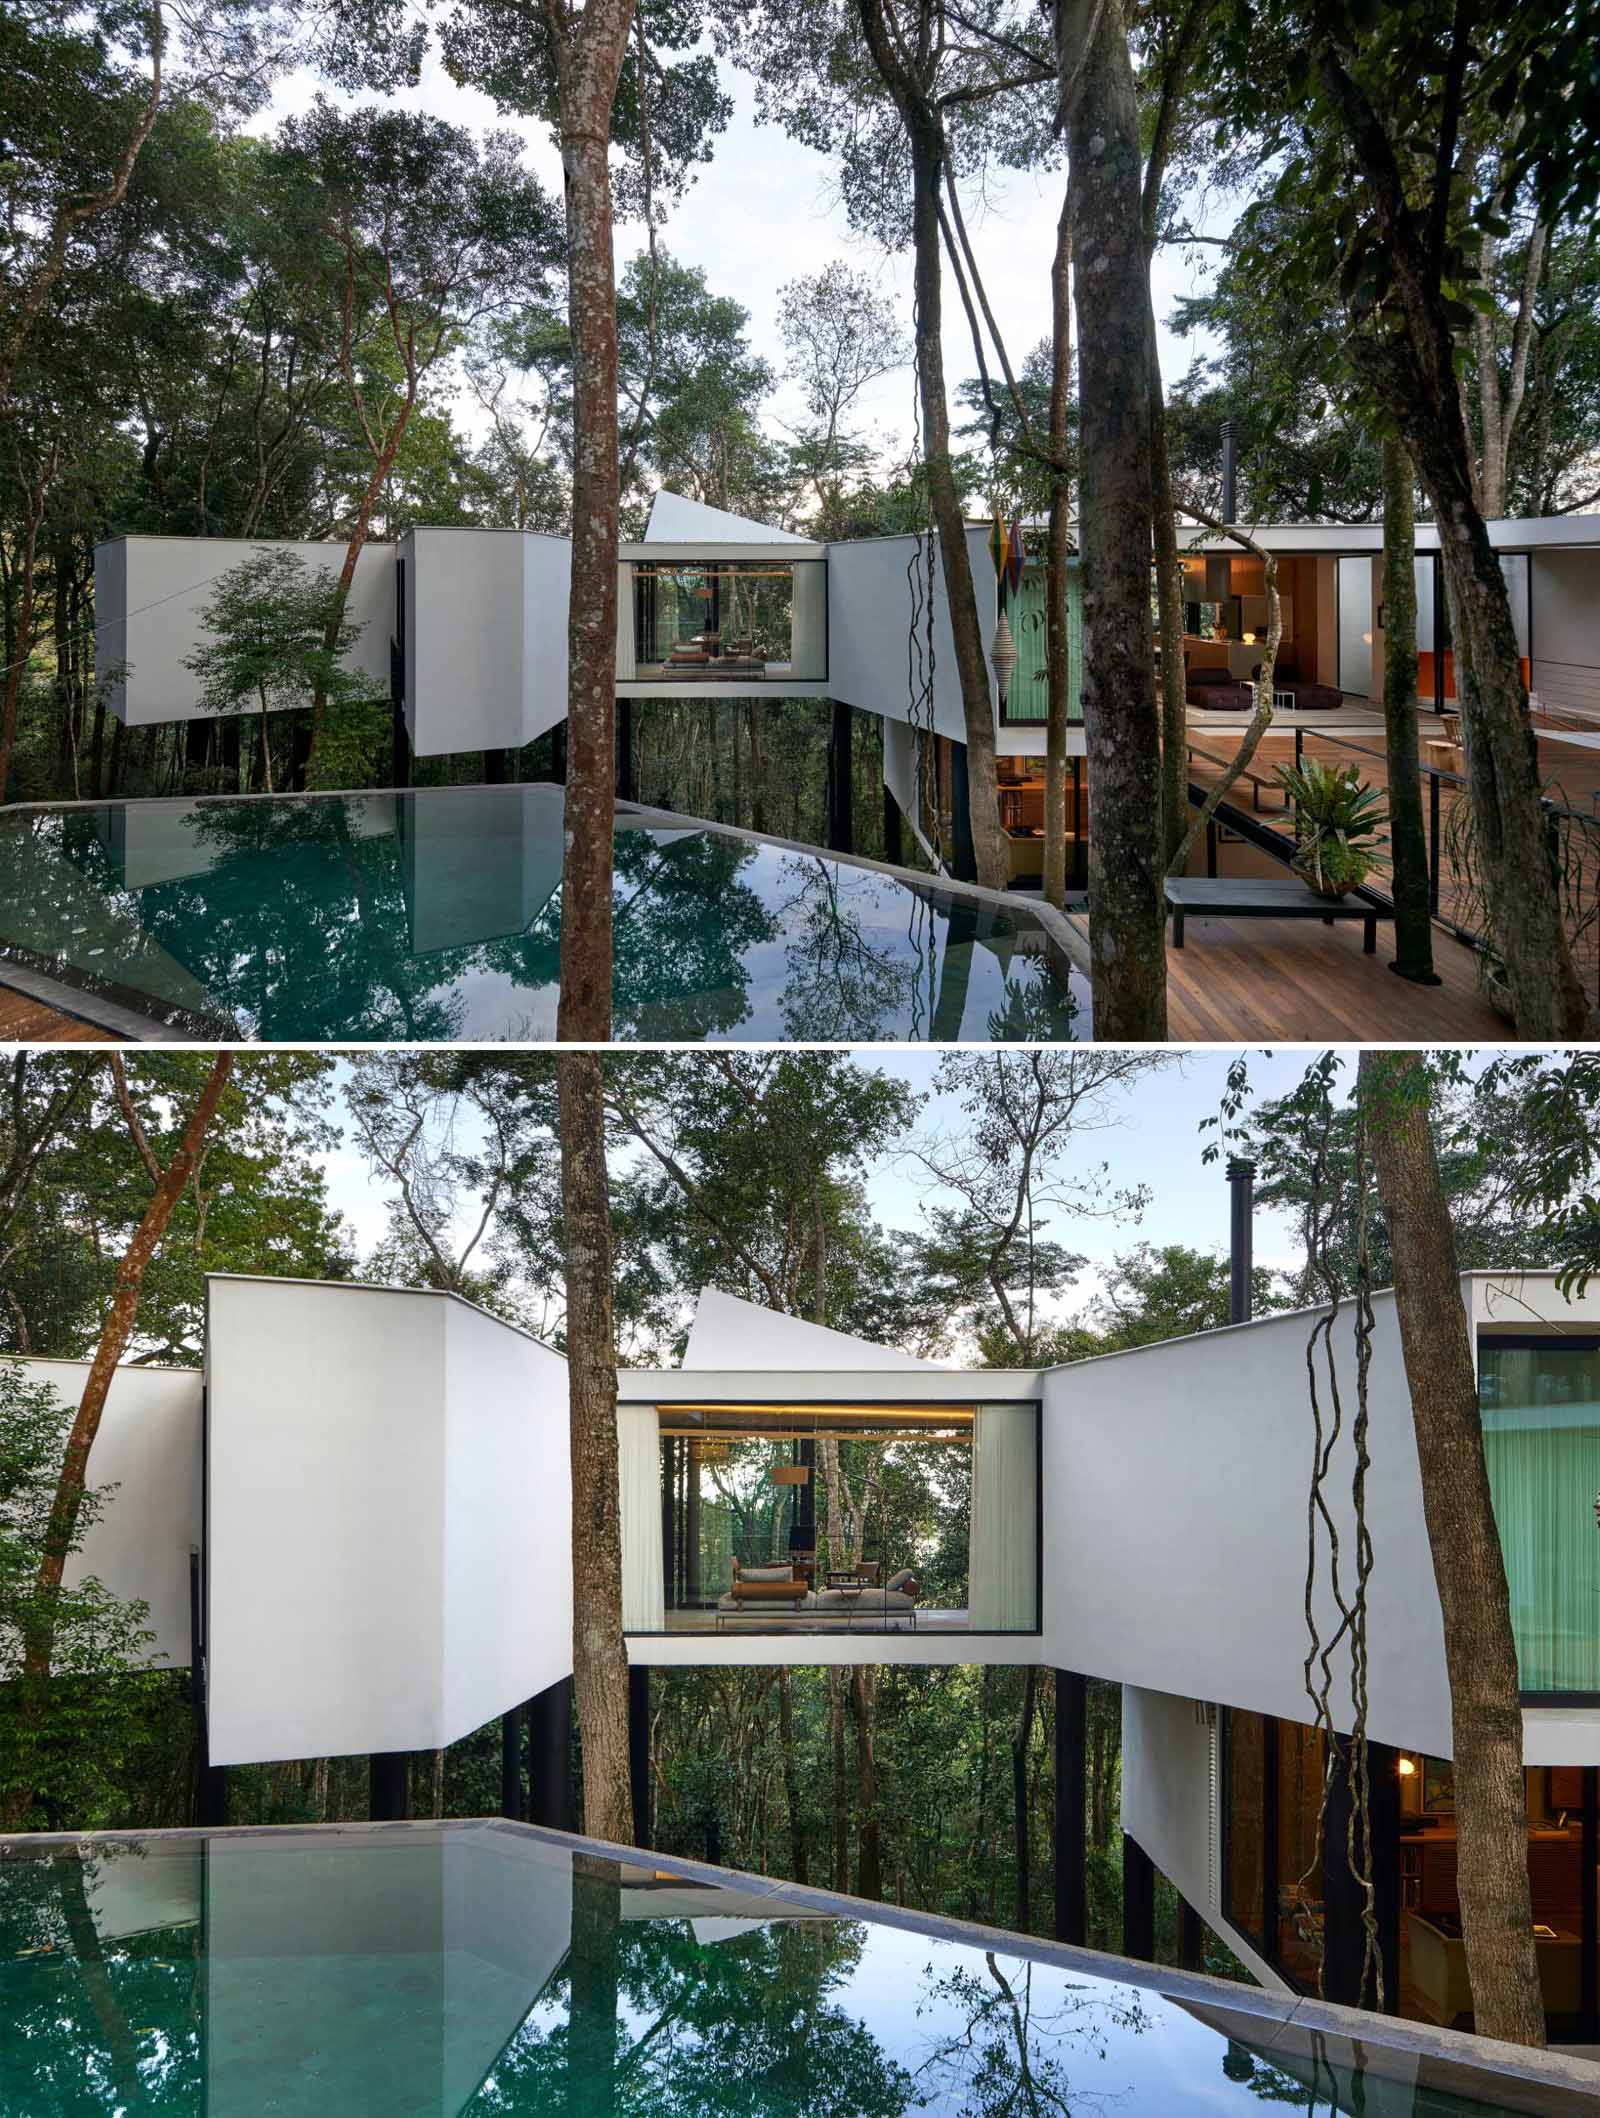 A modern house with a white exterior sits atop black stilts in the rainforest of Nova Lima, Brazil.